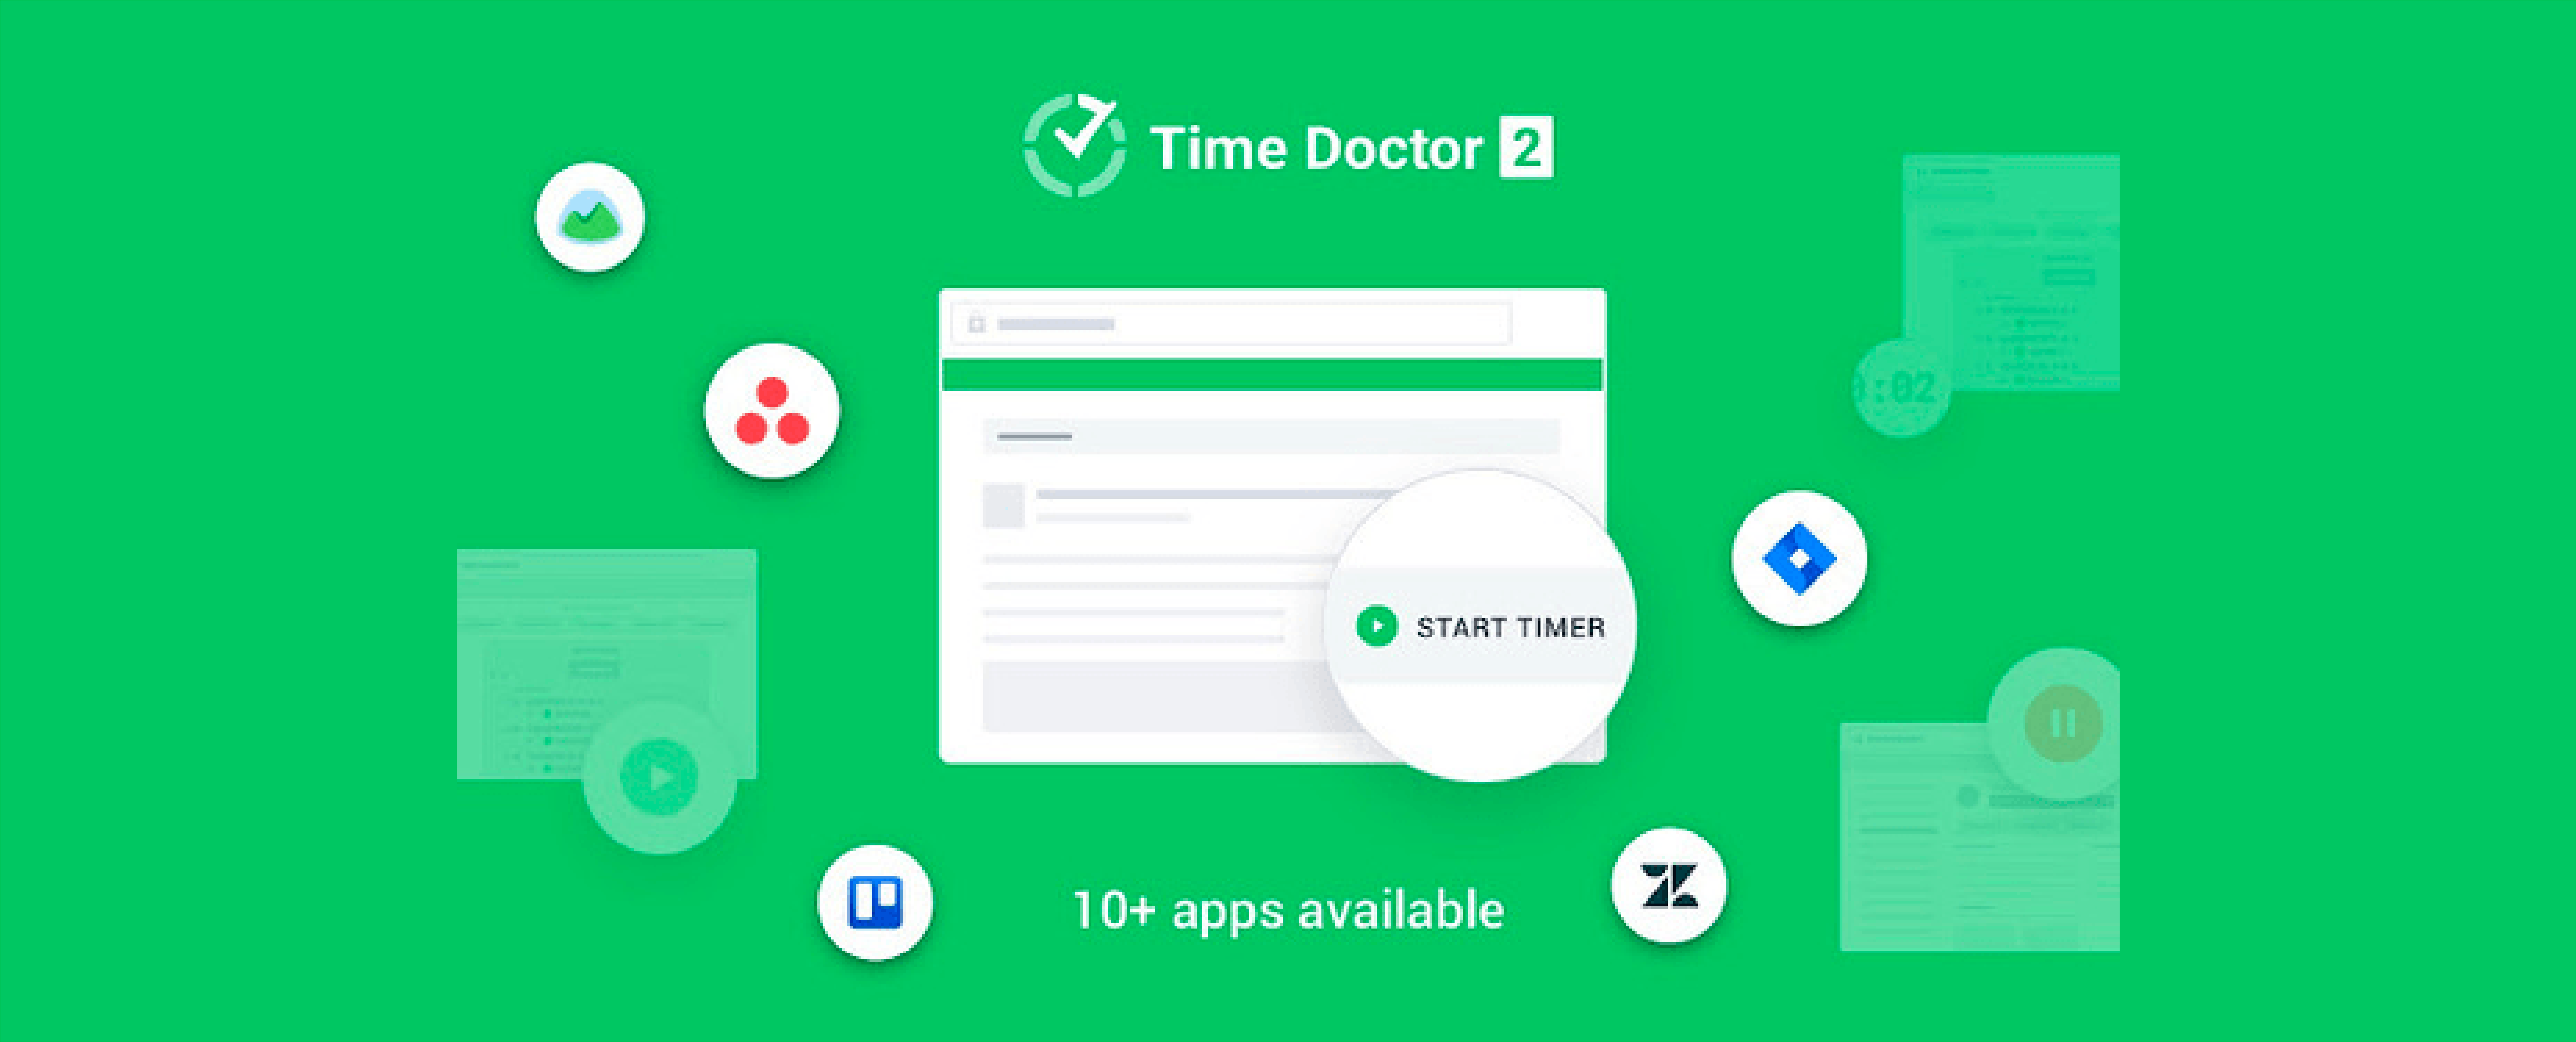 time doctor app